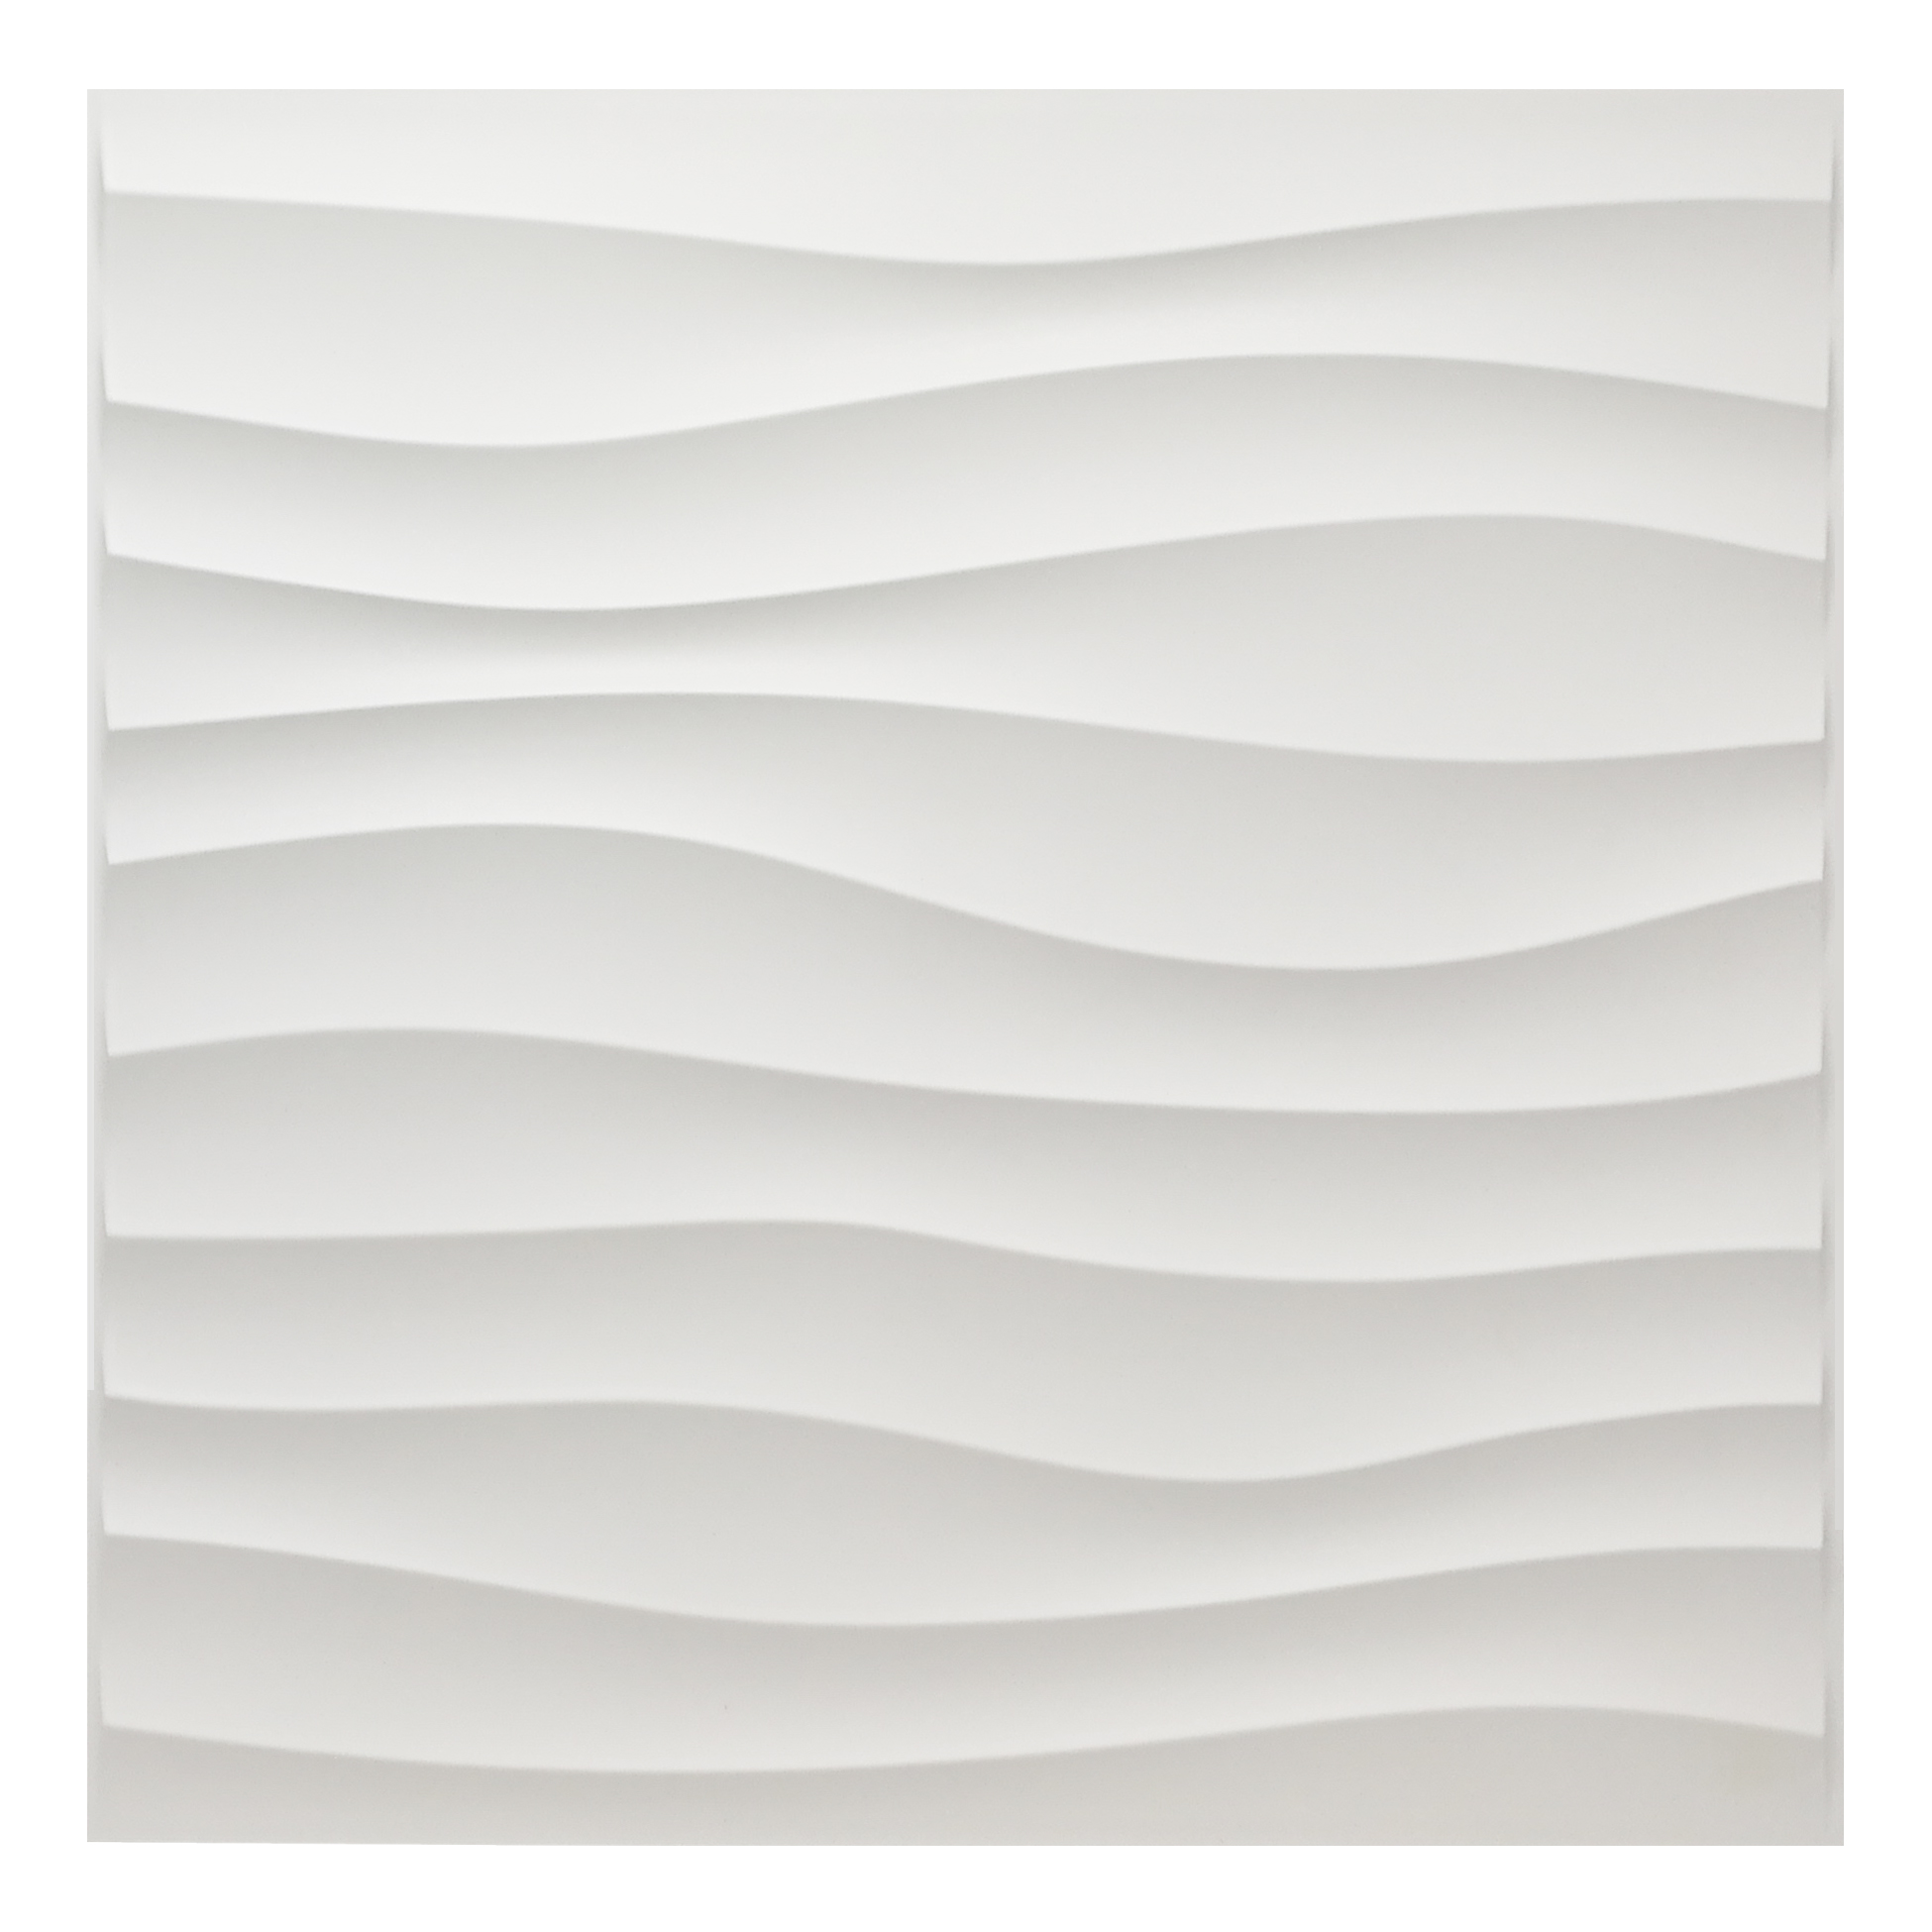 A10040 - Plastic 3D Wall Panel PVC Wave Wall Design, White, 12 Tiles 32 SF